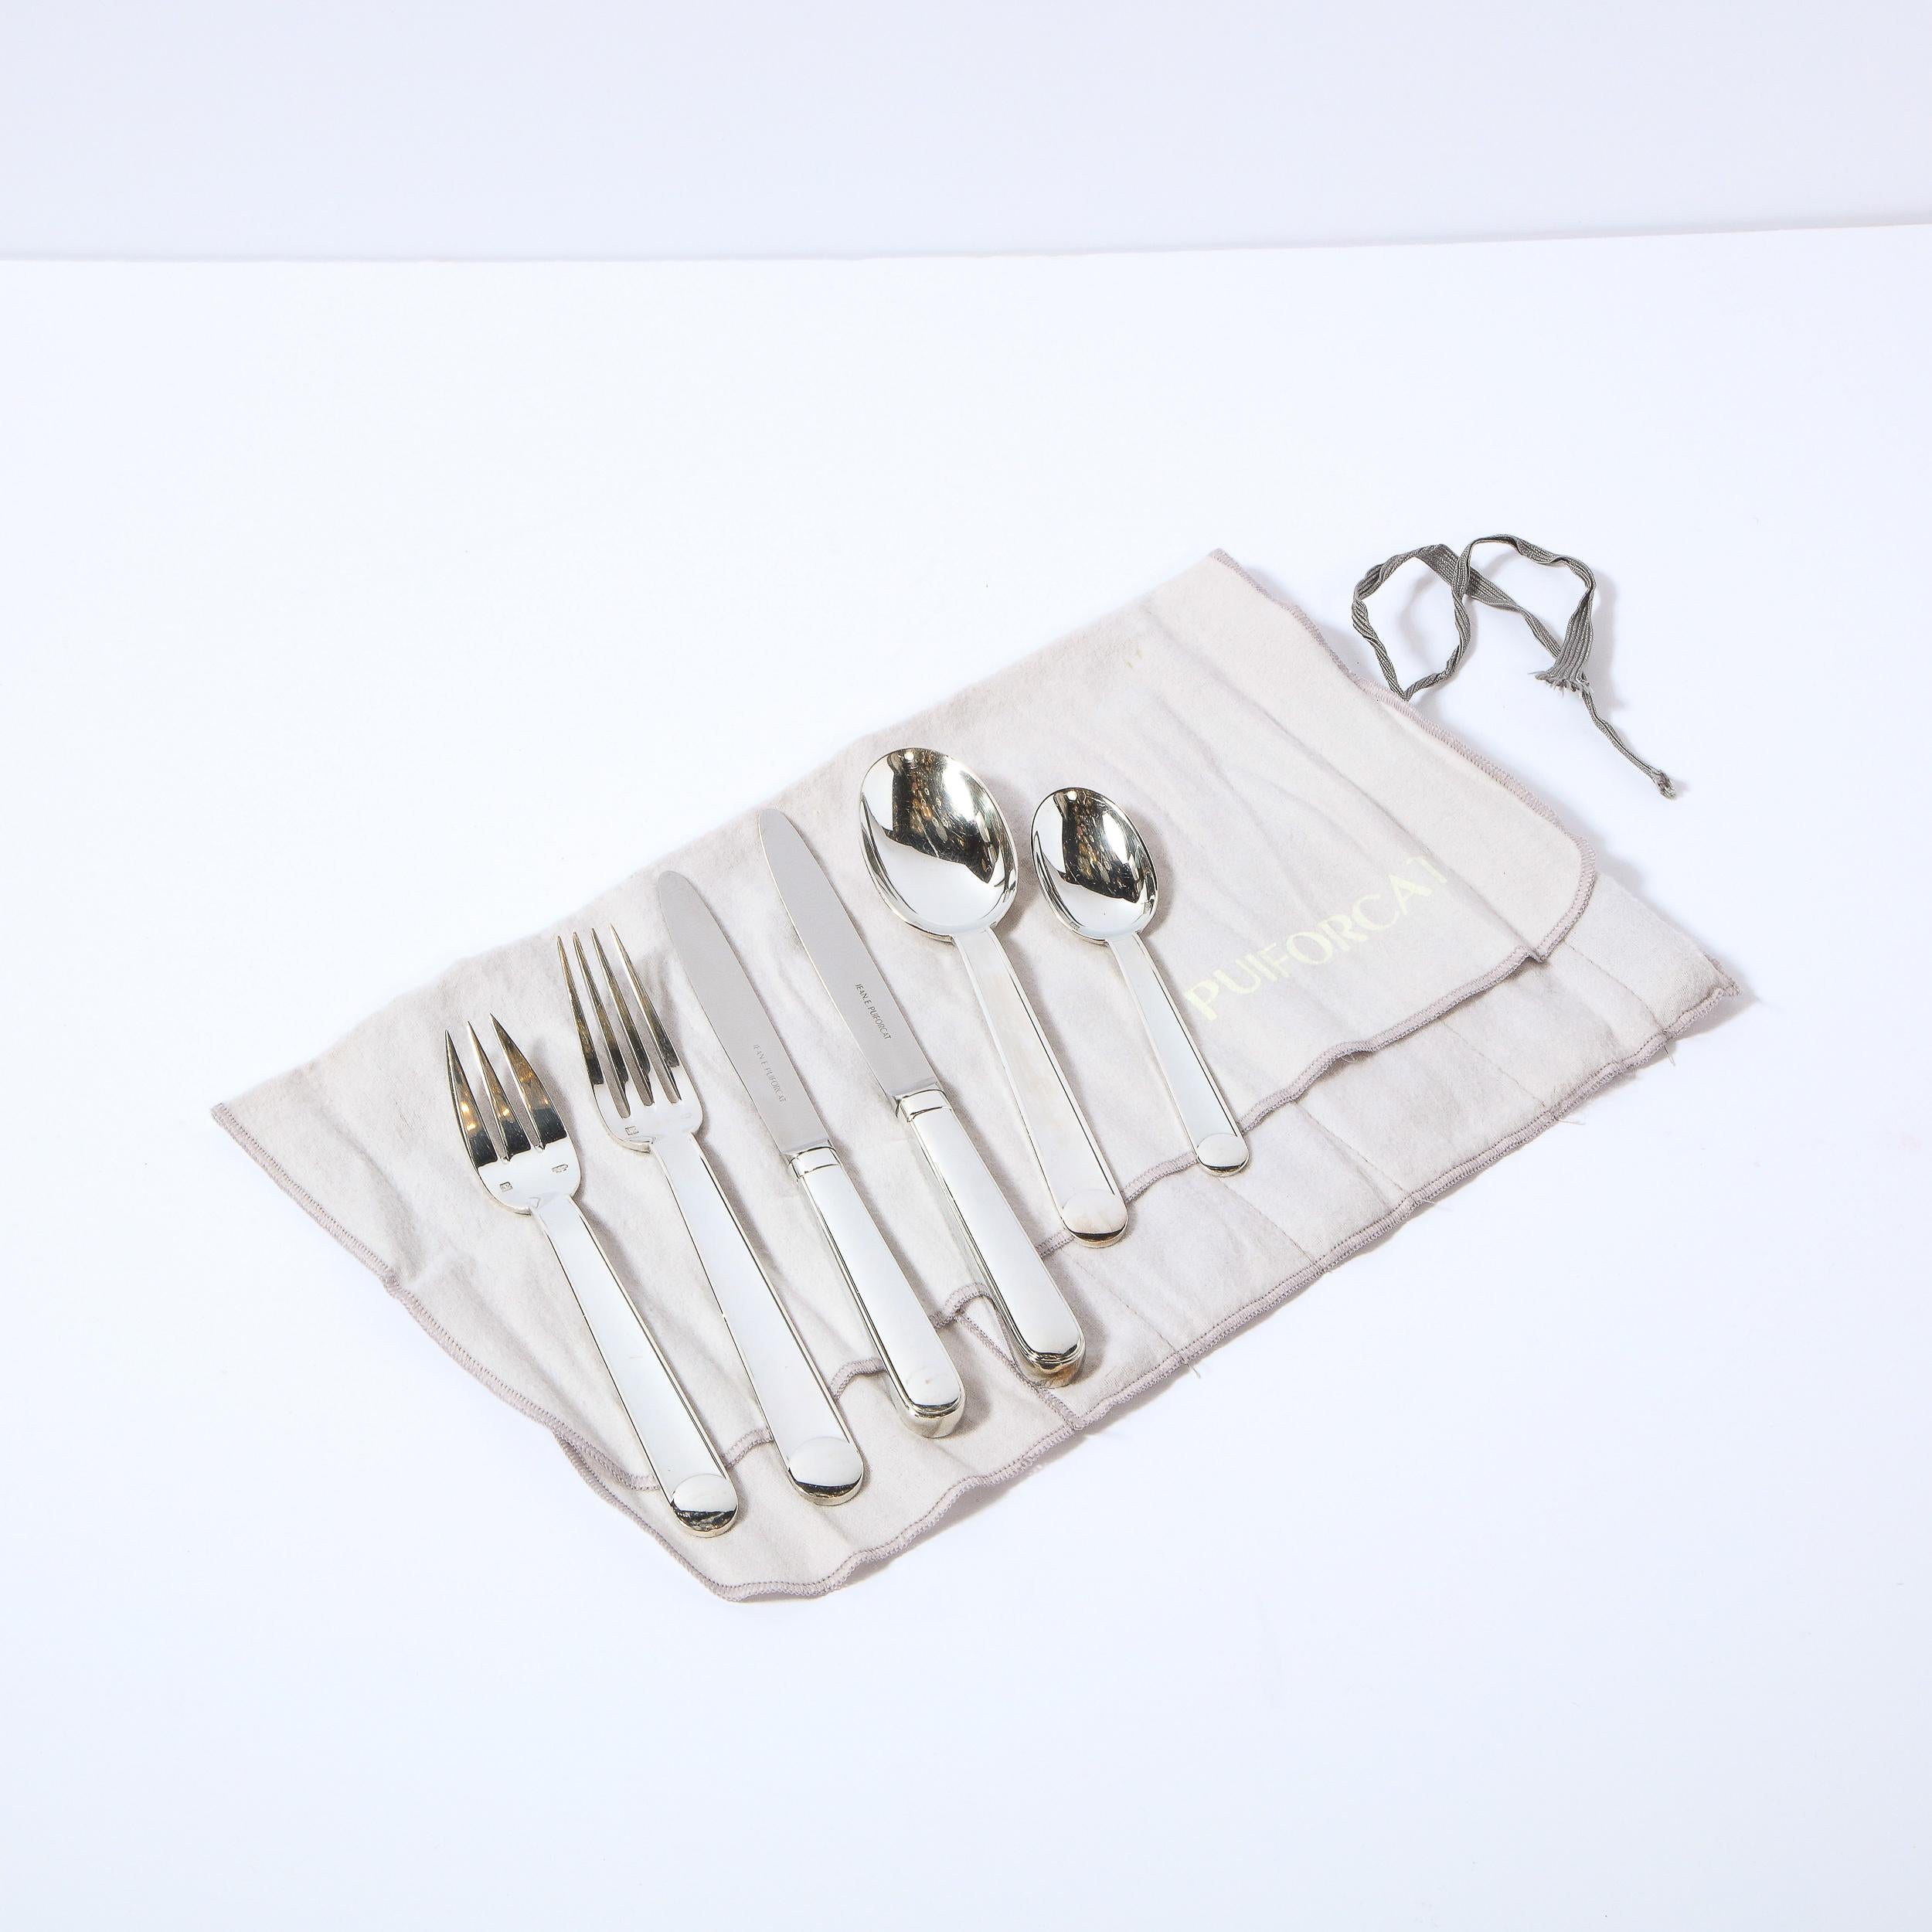 Designed in 1934 by Jean Puirocat for the Ocean liner Normandie that brought passengers from New York to Le Havre, this elegant flatware graced the dinner table for its first-class passengers. The set has been celebrated since its inception for its